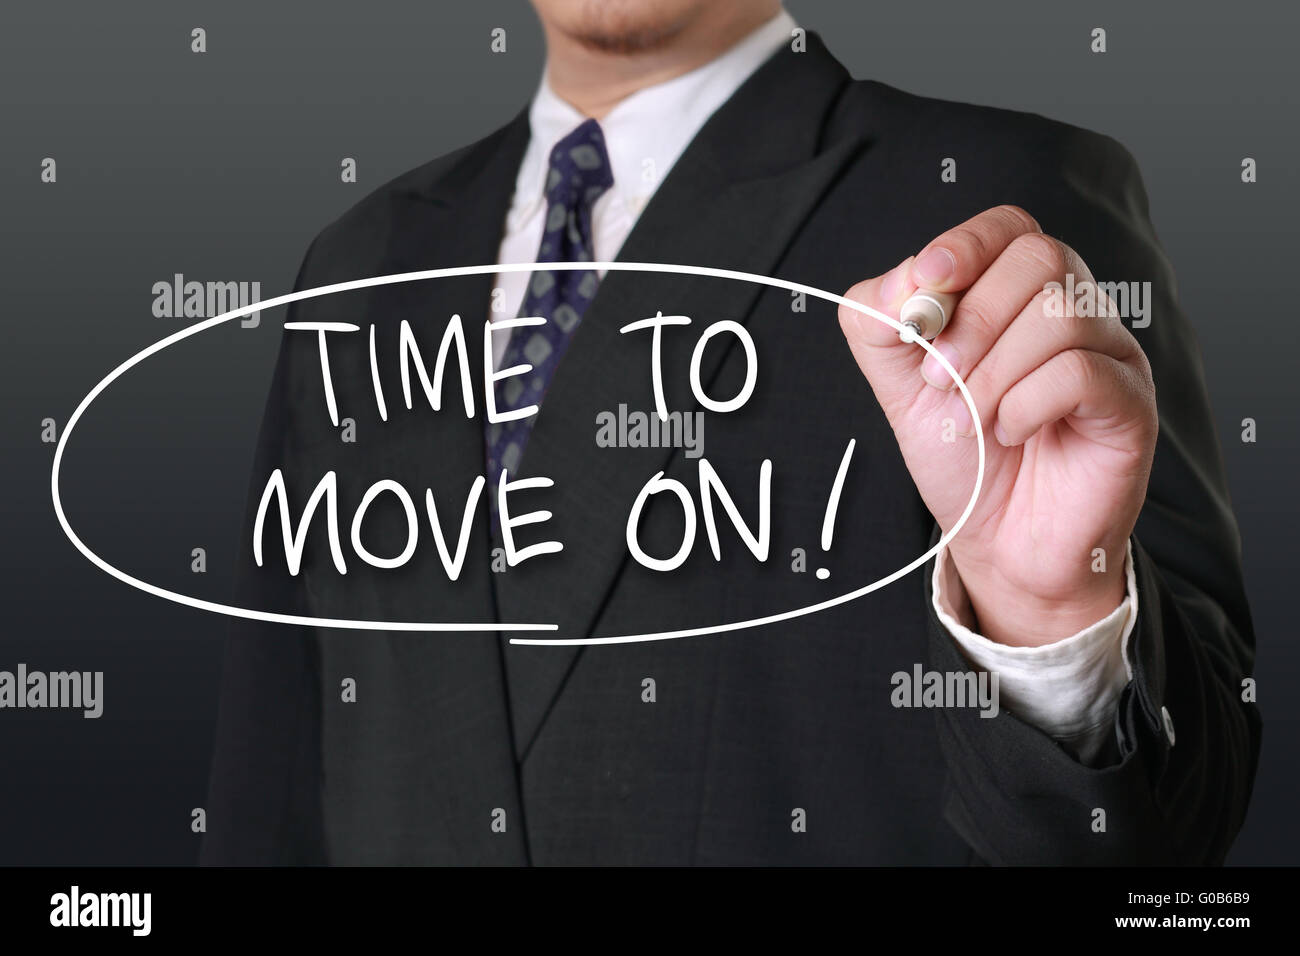 Business concept, image of a businessman holding marker and write Time To Move On words Stock Photo